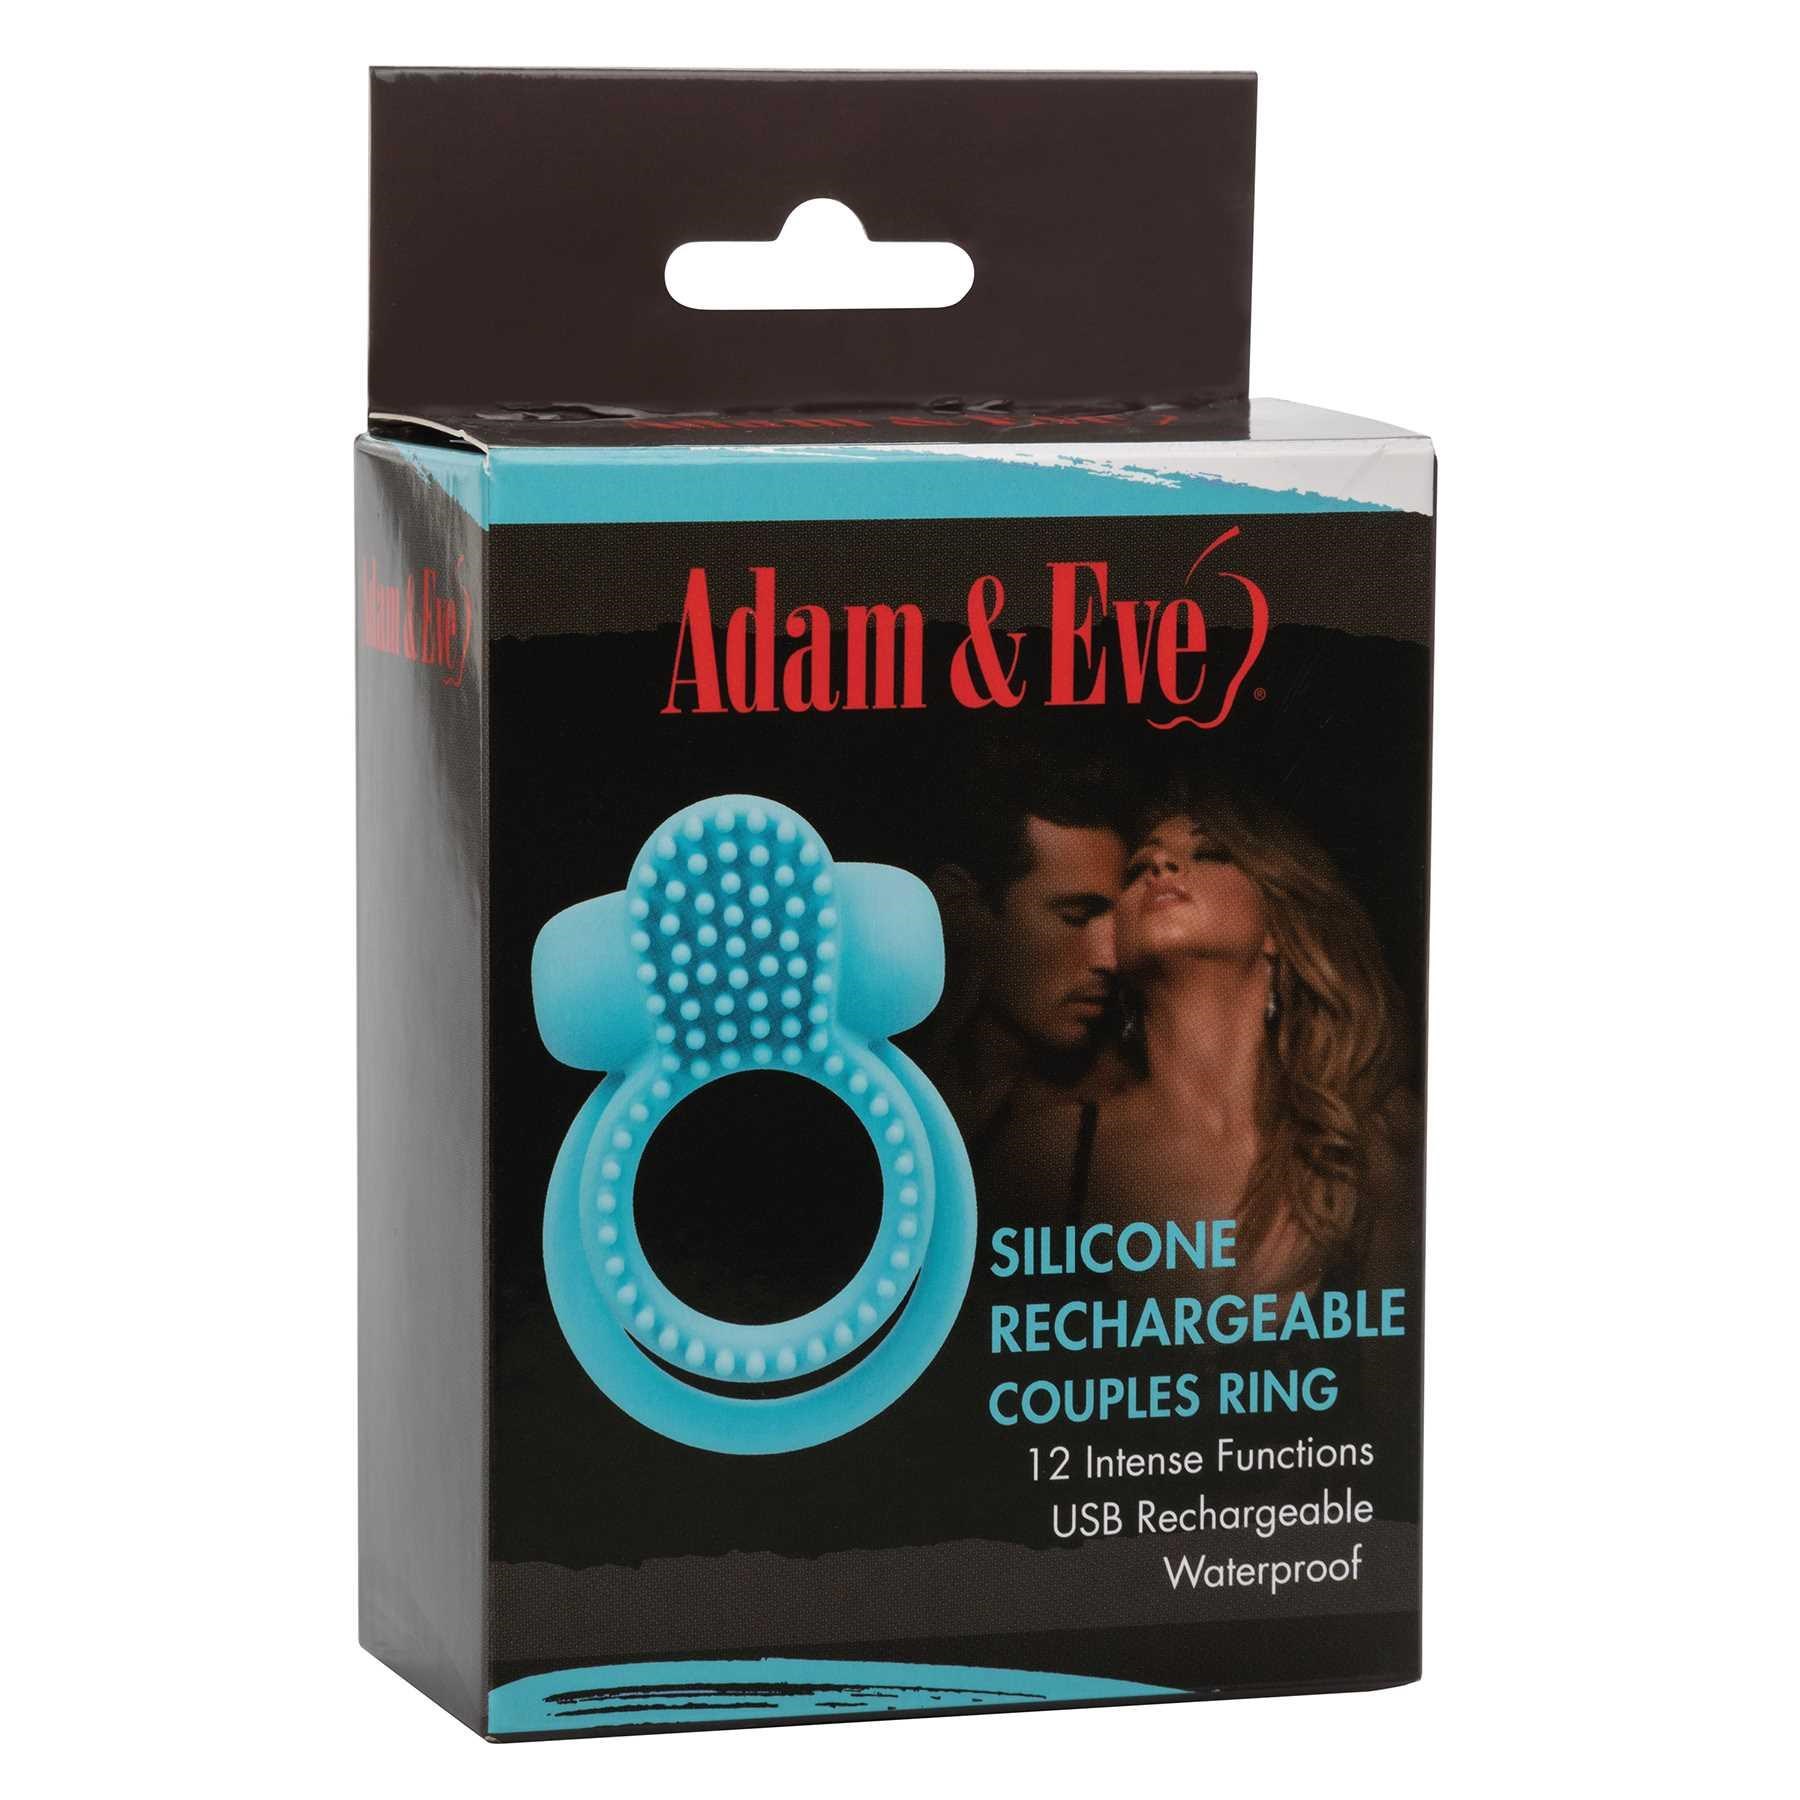 Adam & Eve Silicone Couples Enhancer Ring front of box packaging